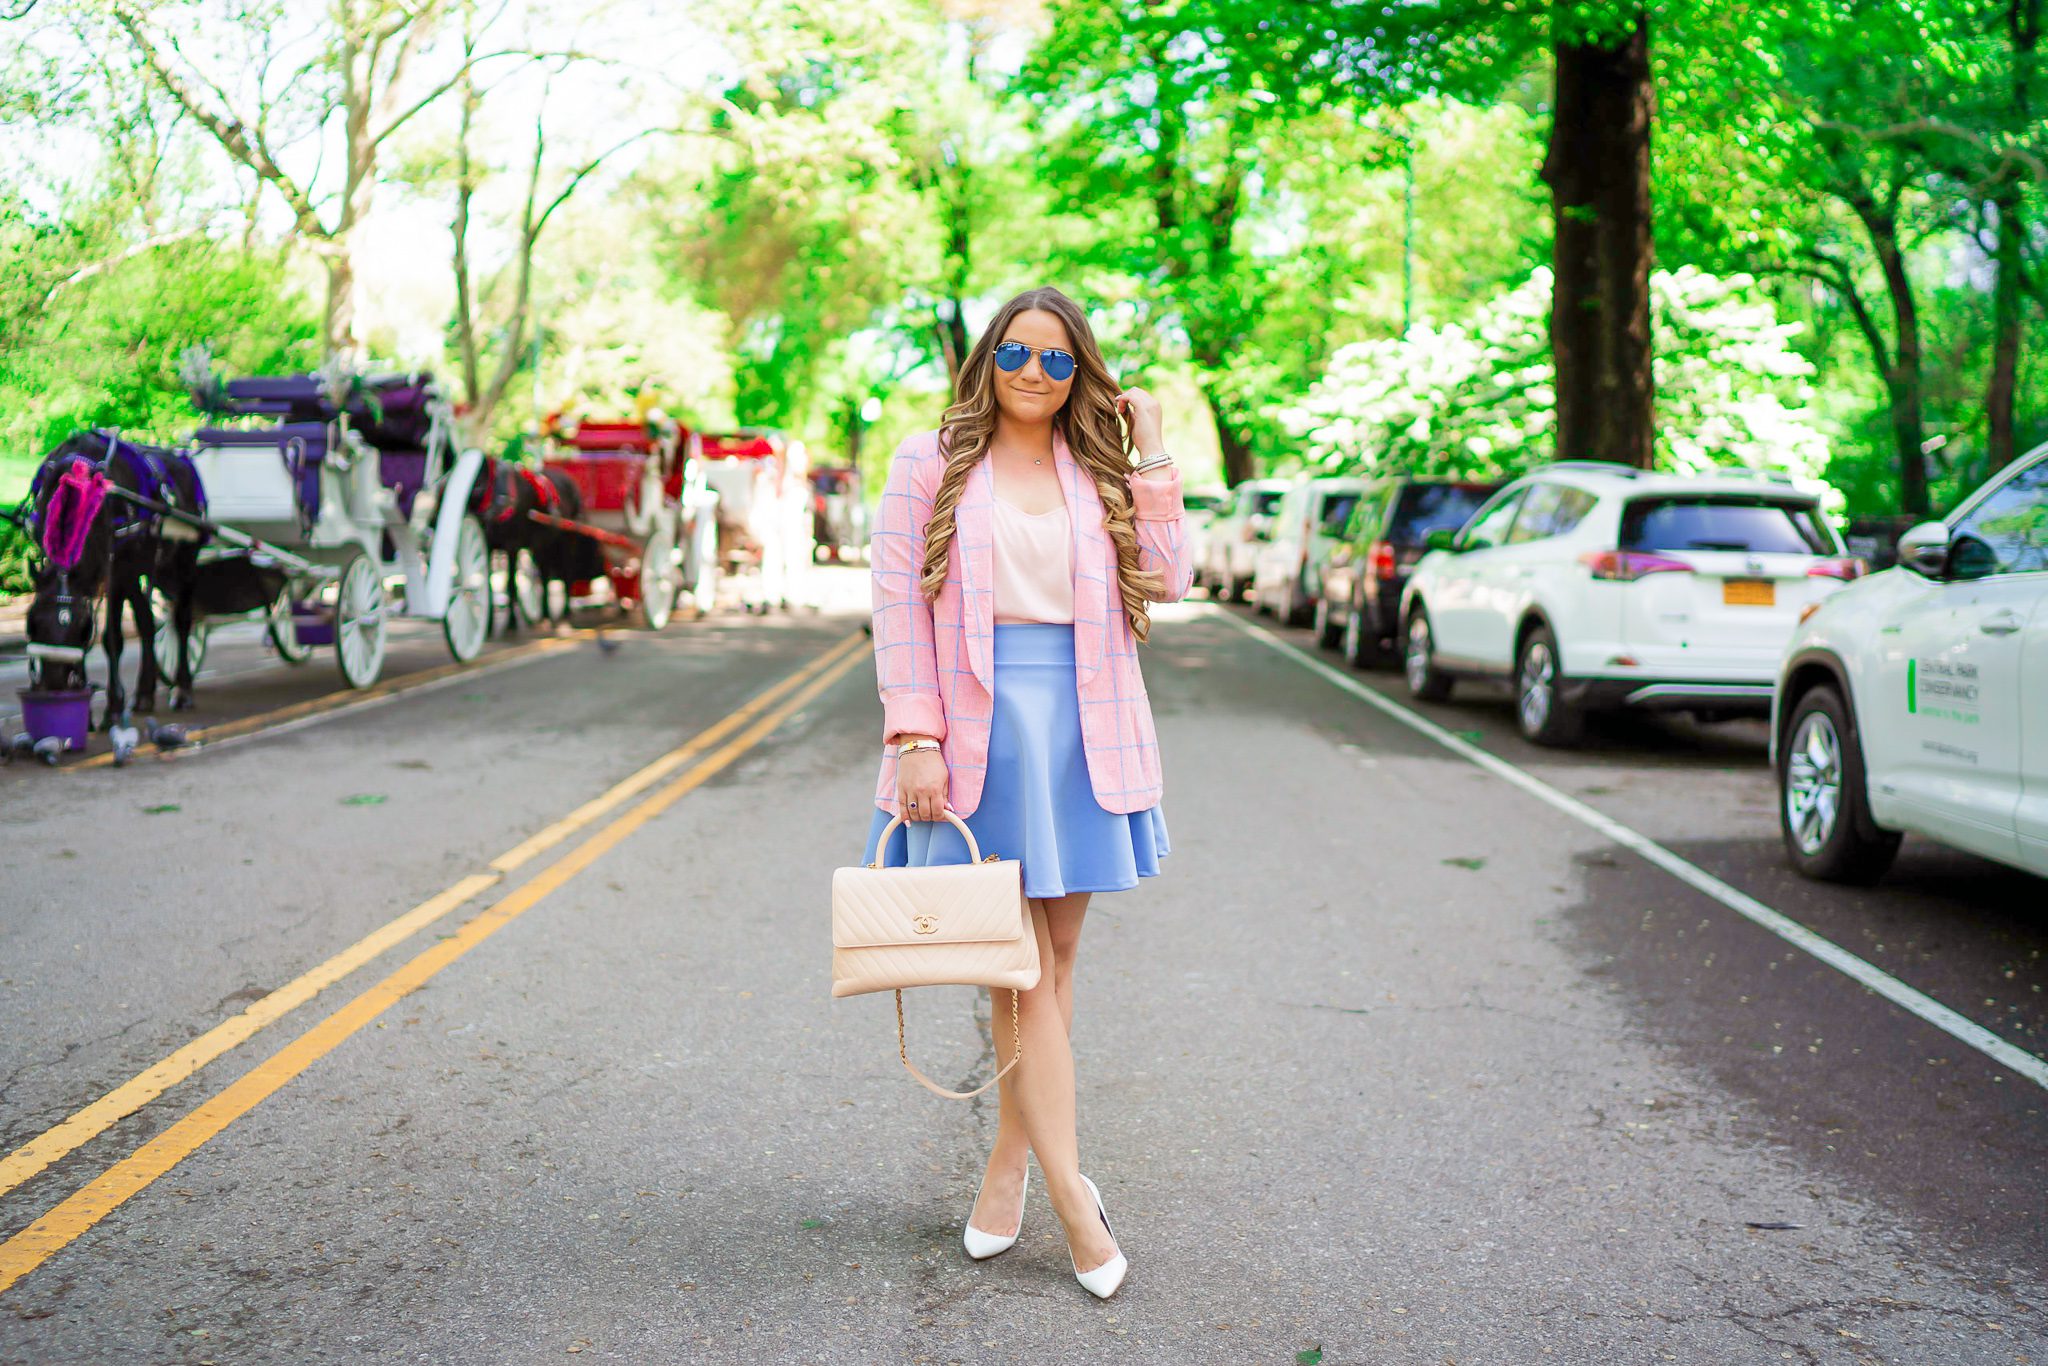 missyonmadison, missyonmadison blog, la blogger, missyonmadison instagram, currently wearing, style inspo, outfit inspo, outfit ideas, central park nyc, nyc blogger, travel blogger, checkered blazer, blue skater skirt, amazon fashion, white pumps, white pointed toe pumps, beige chanel bag, chanel top handle bag, pink chiffon camisole, chanel bag, hair extensions, nyc street style,